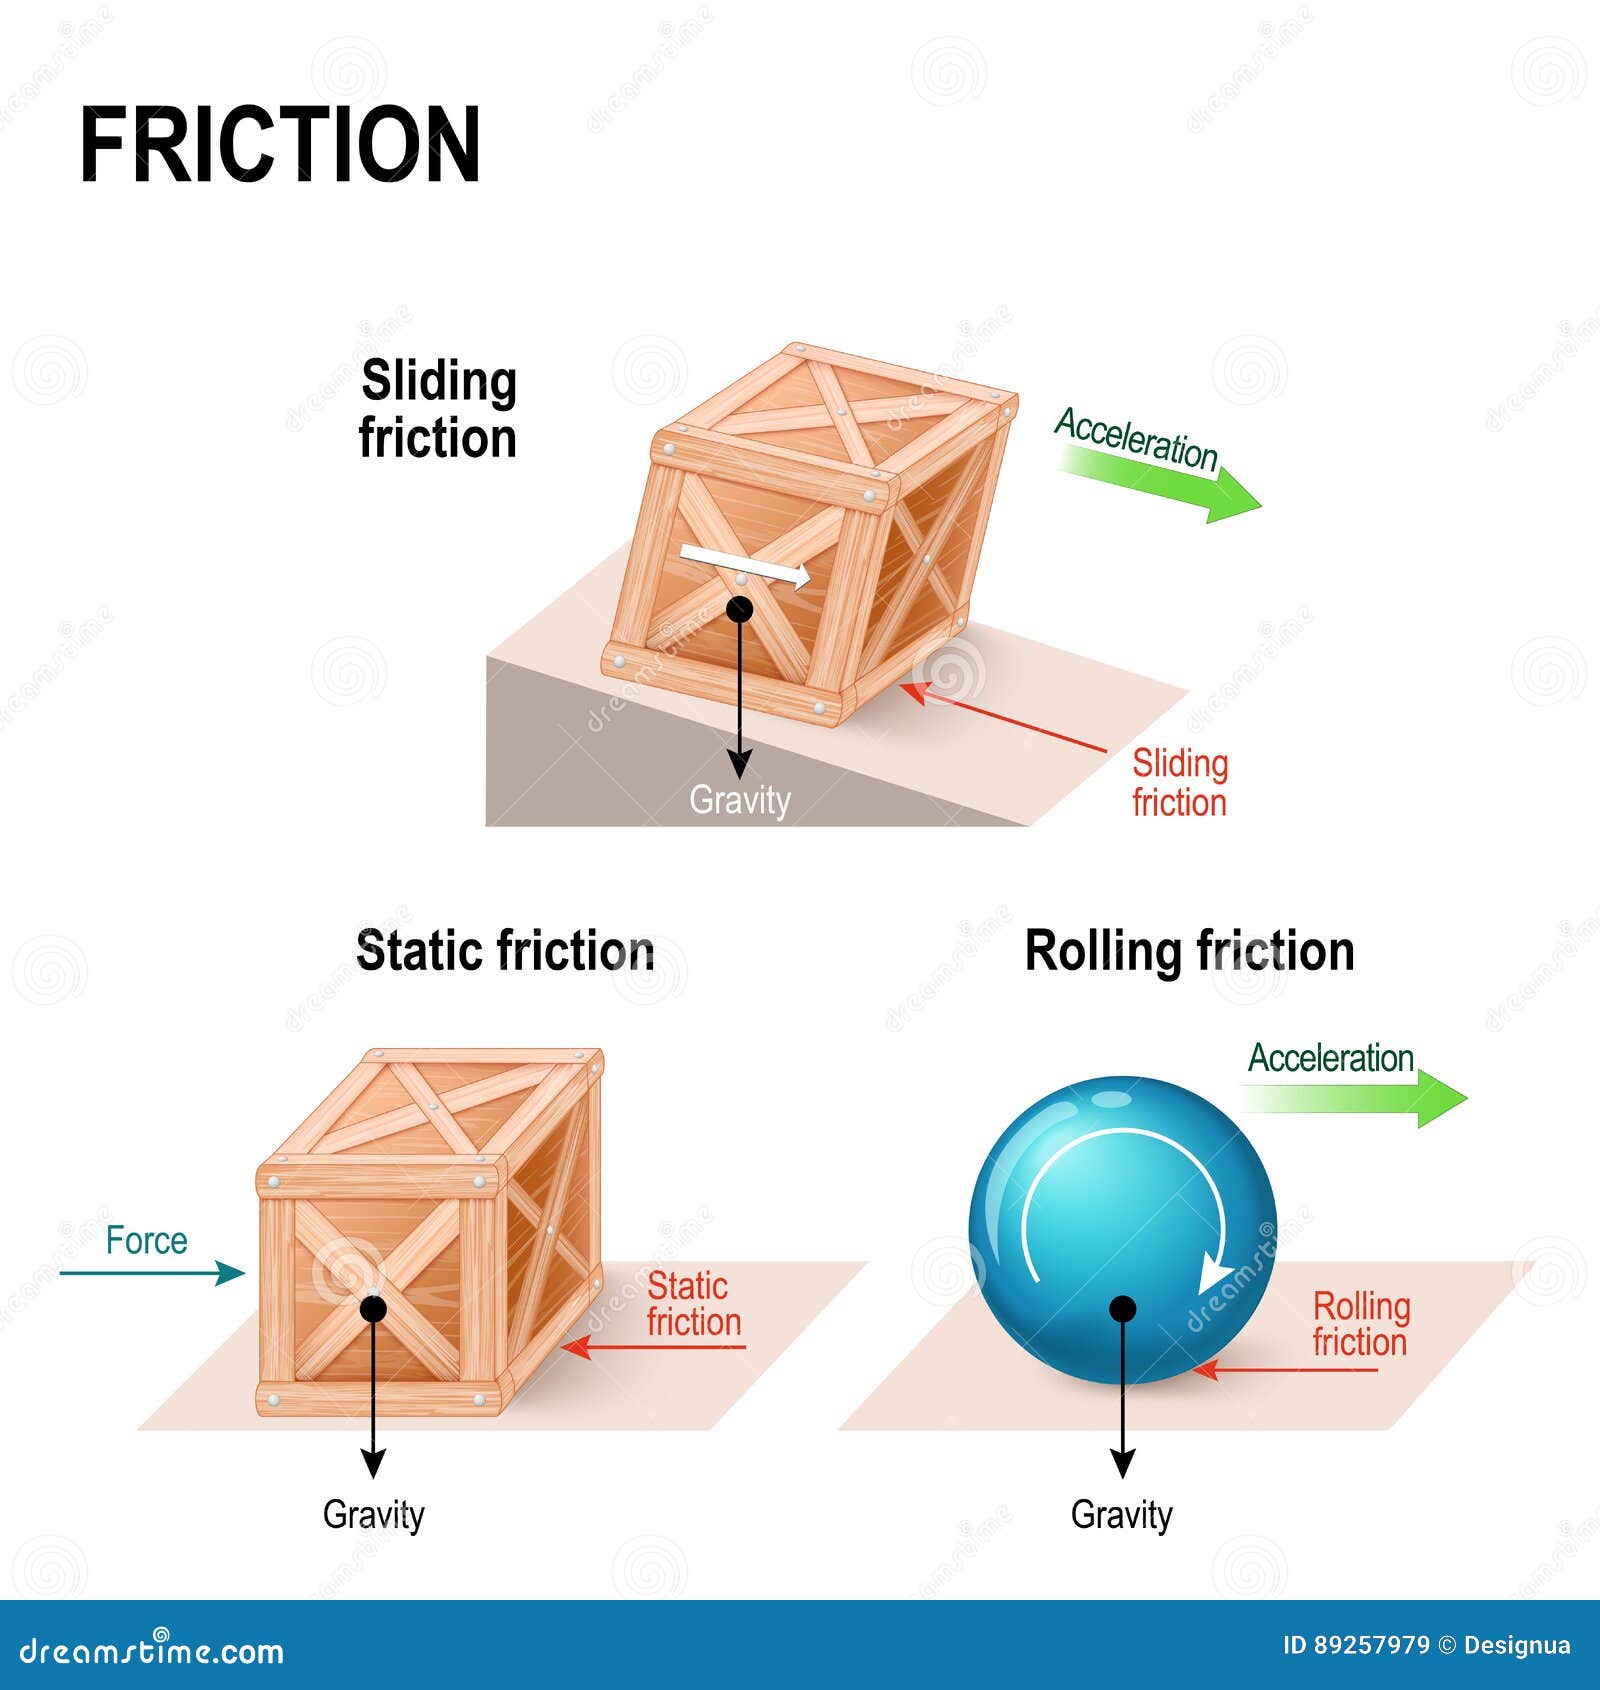 friction force